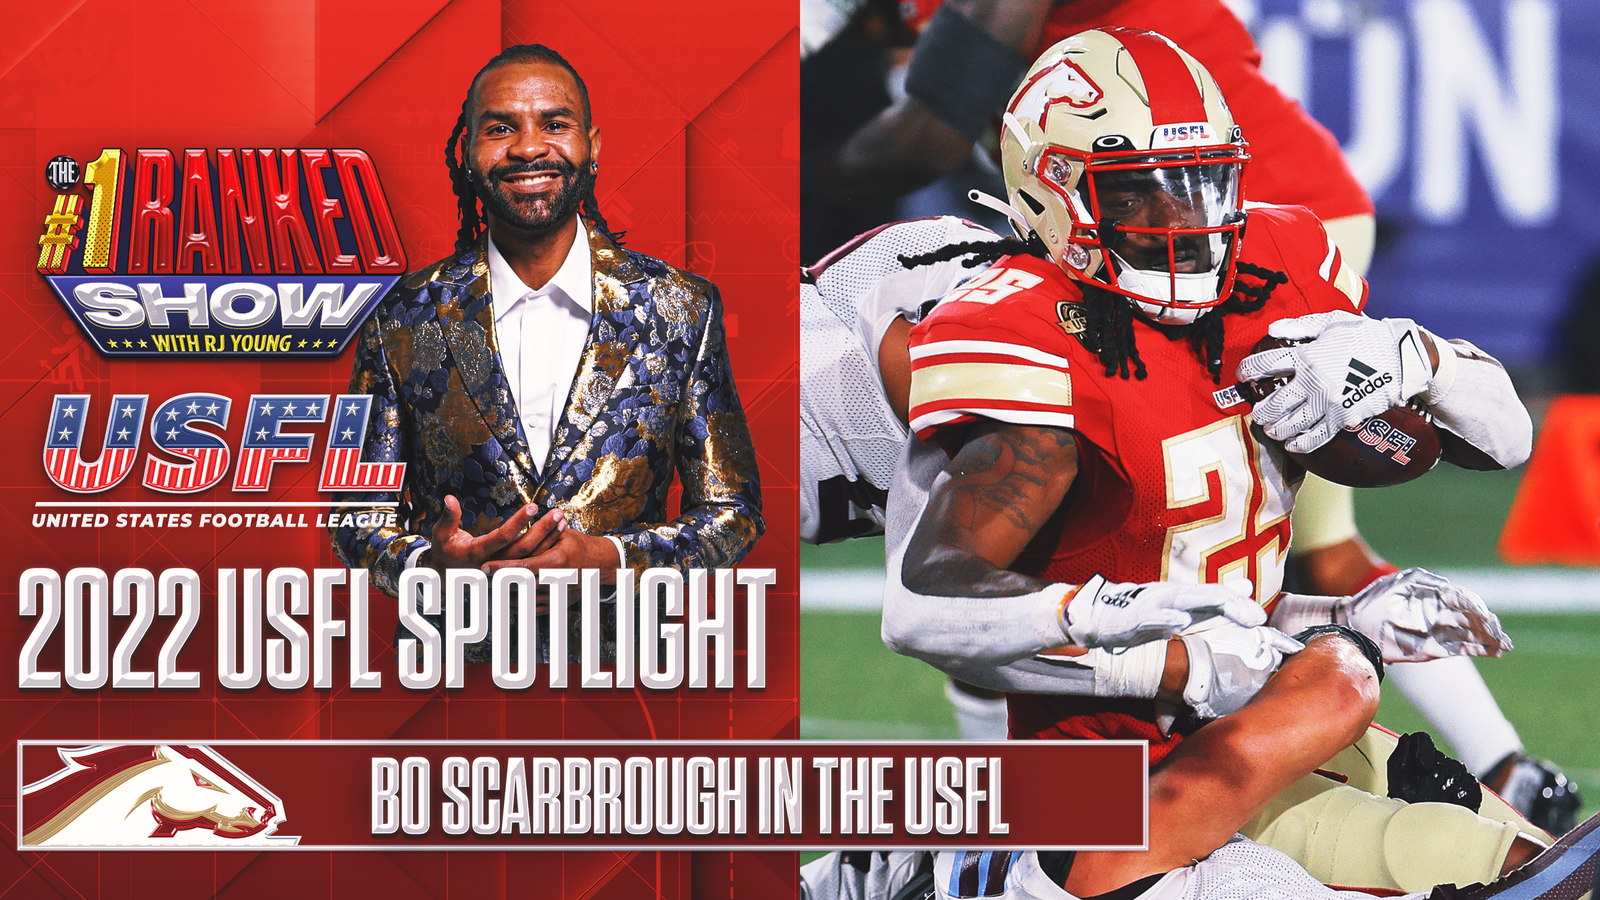 Bo Scarbrough discusses his breakout outing in the USFL